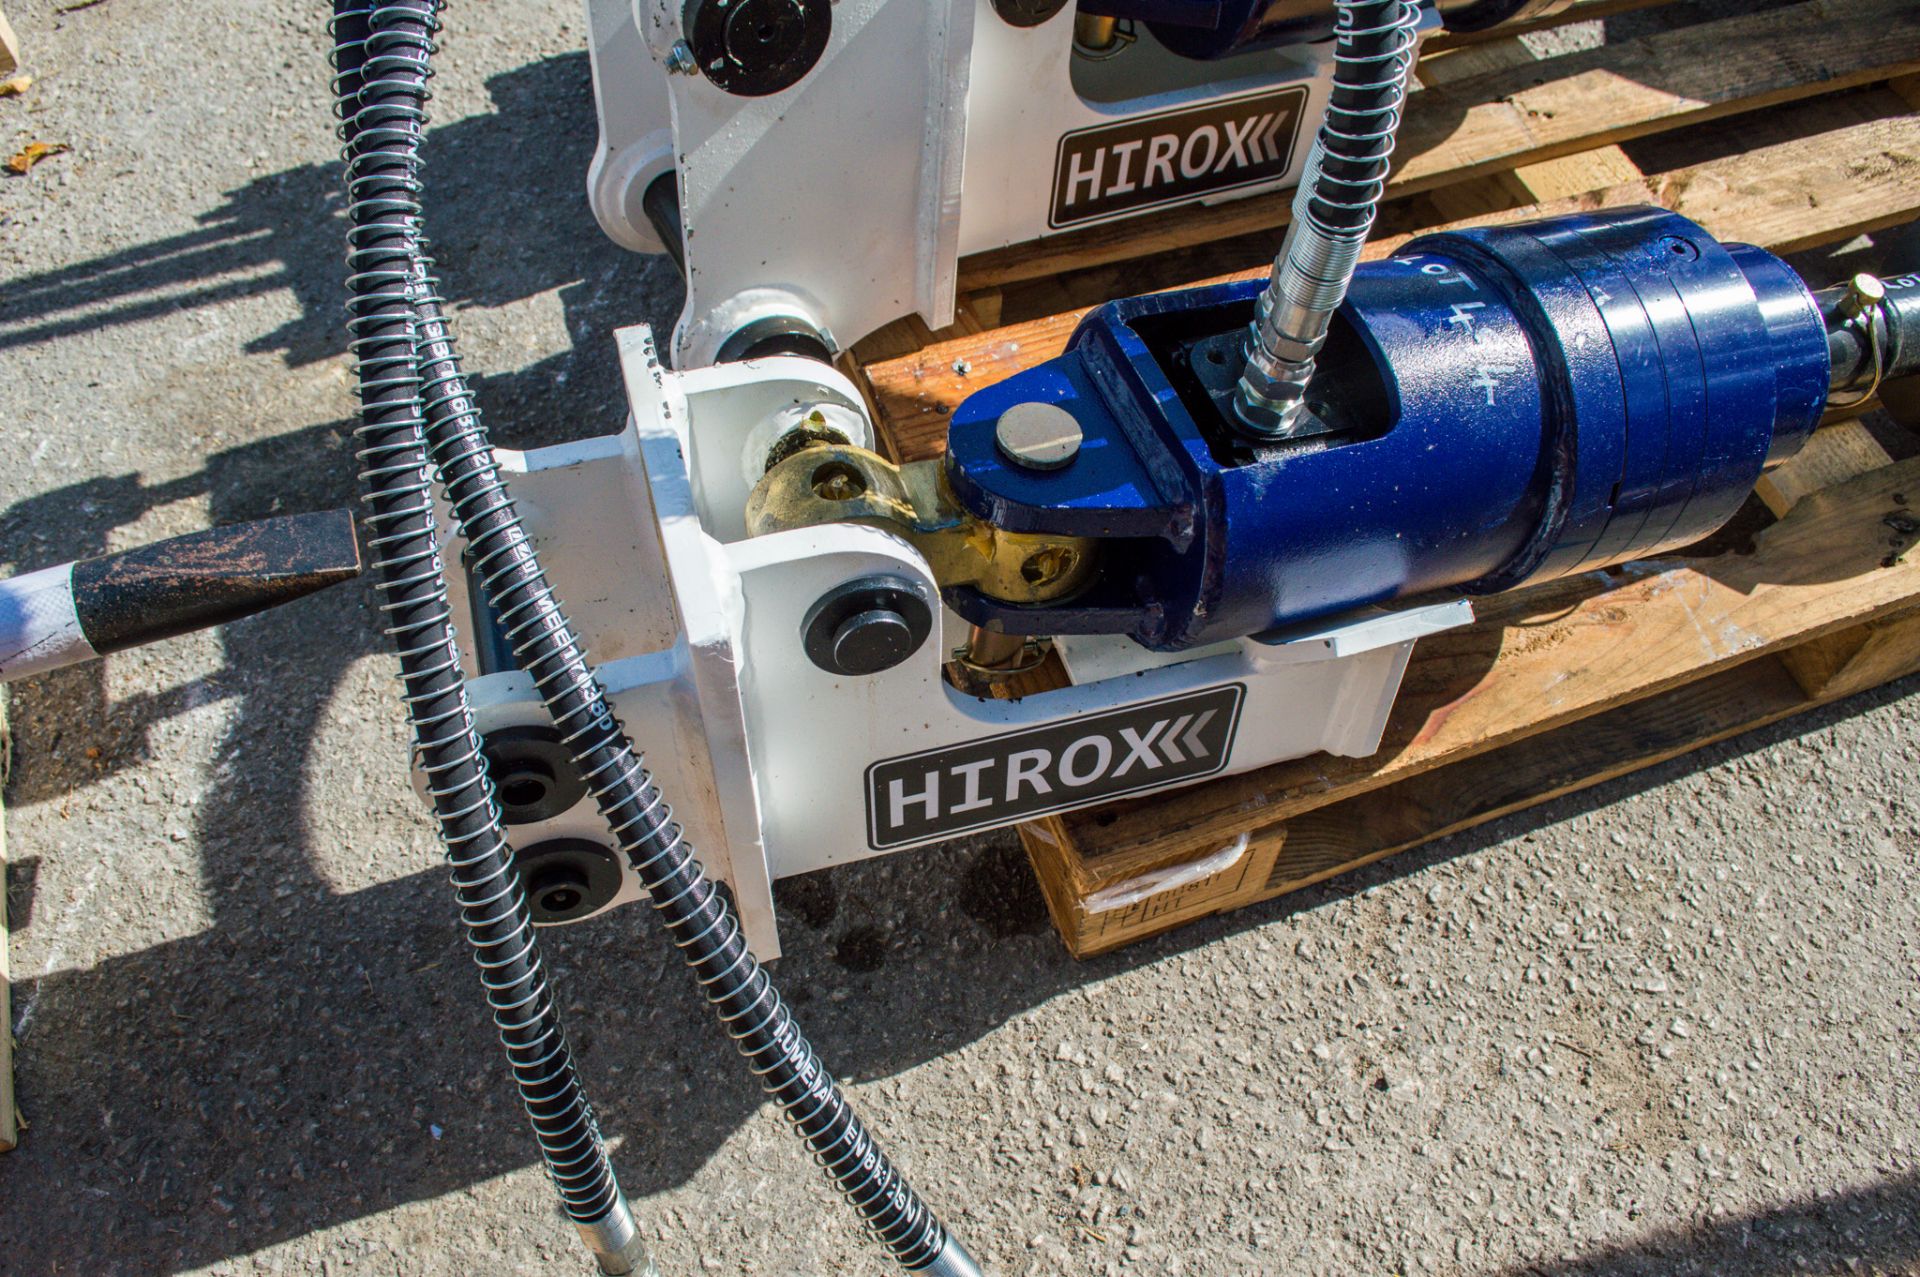 Hirox hydraulic auger attachment to suit 1.5 tonne excavator ** New and unused ** - Image 3 of 3